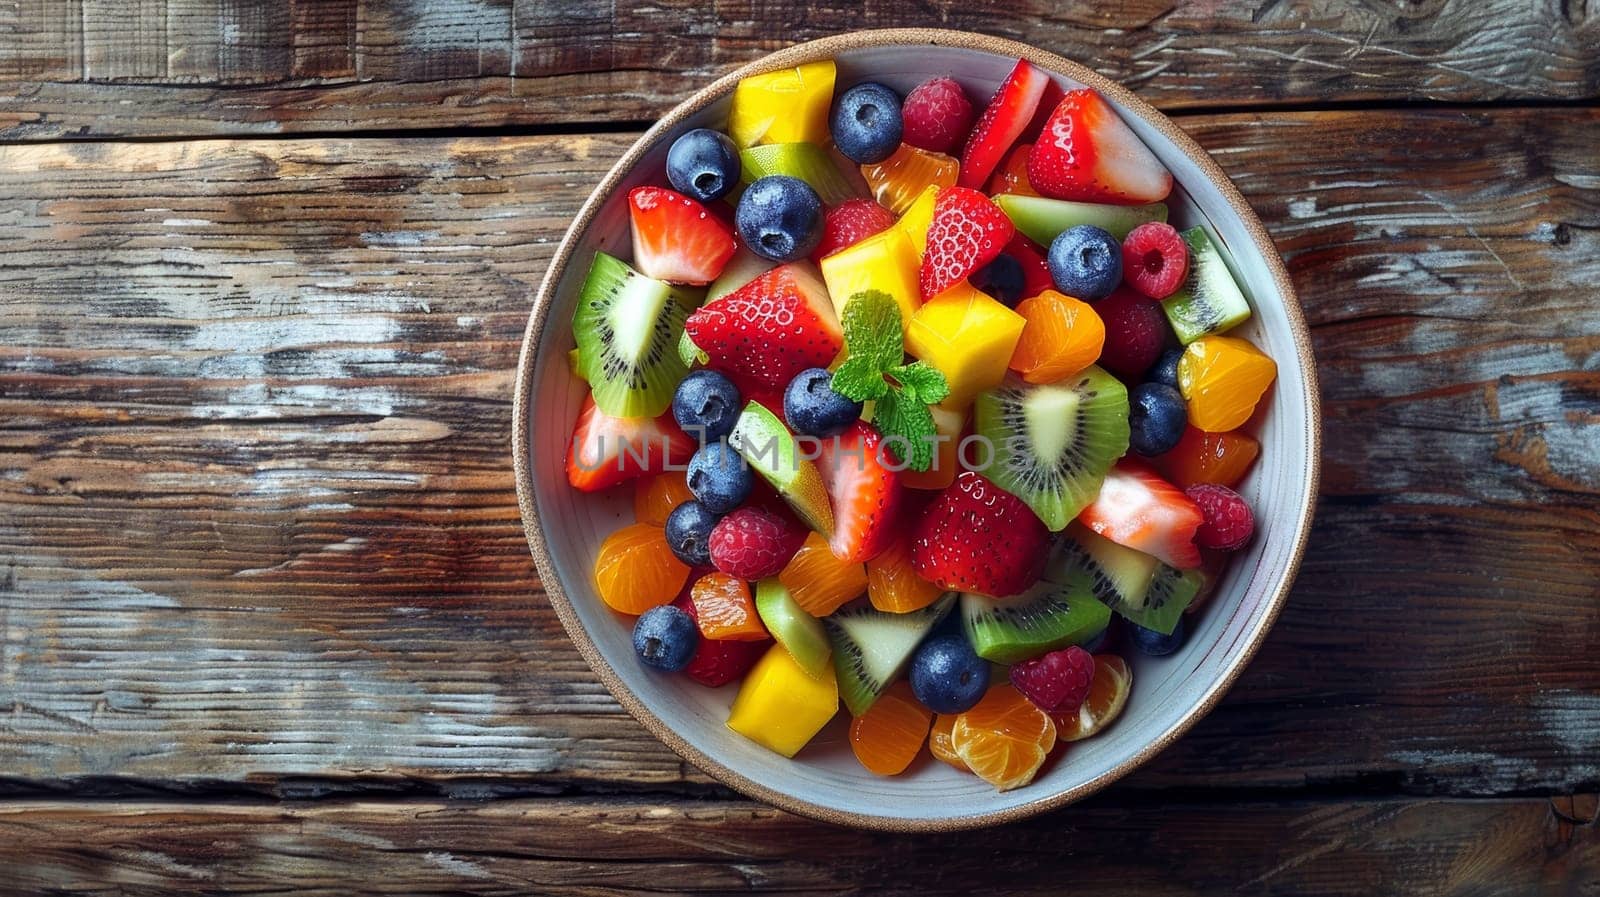 A top-down view of a colorful fruit salad with strawberries, blueberries, raspberries, and citrus in a ceramic bowl on a wooden surface. Banner with copy space.